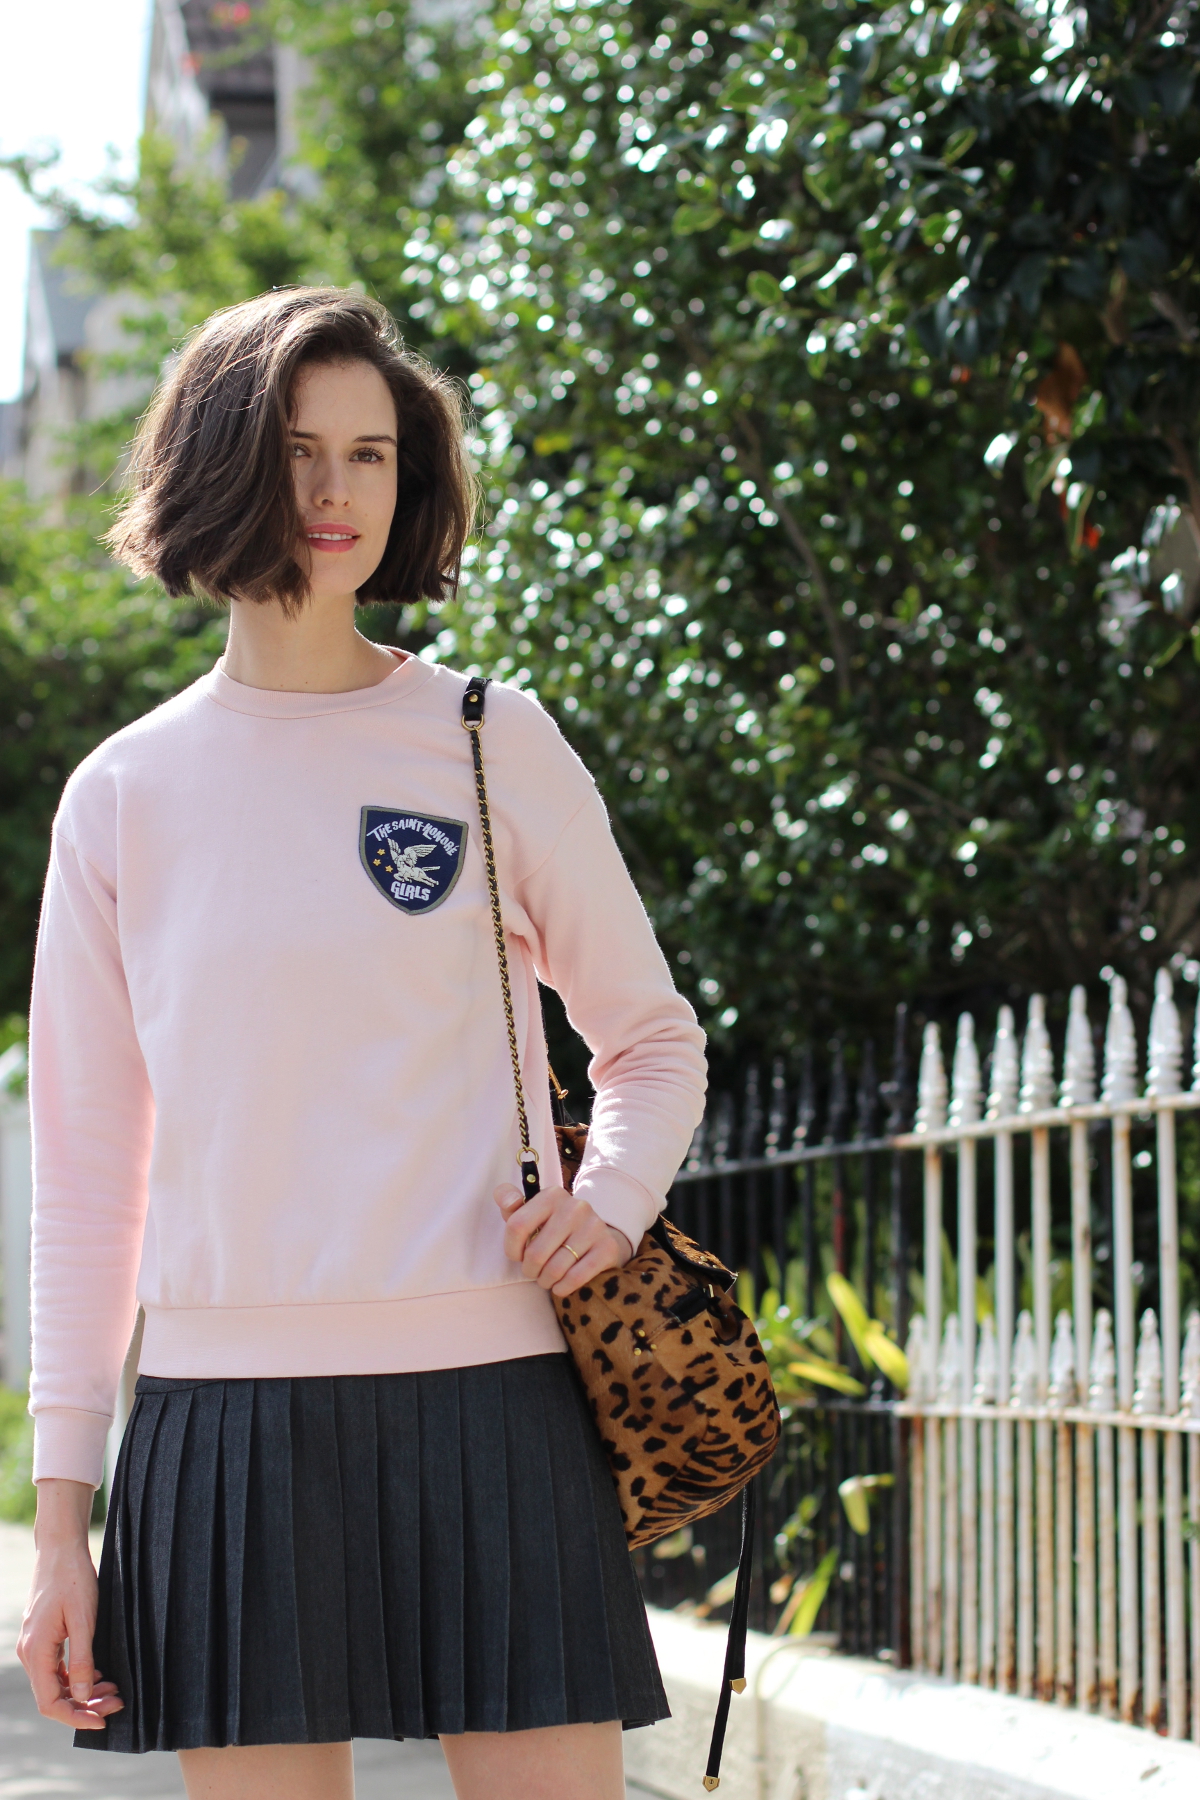 BY CHILL SYDNEY STYLE BLOG Chloe Hill in Etre Cecile pink sweatshirt, antipodium pleated dress and Jerome Dreyfuss leopard backpack